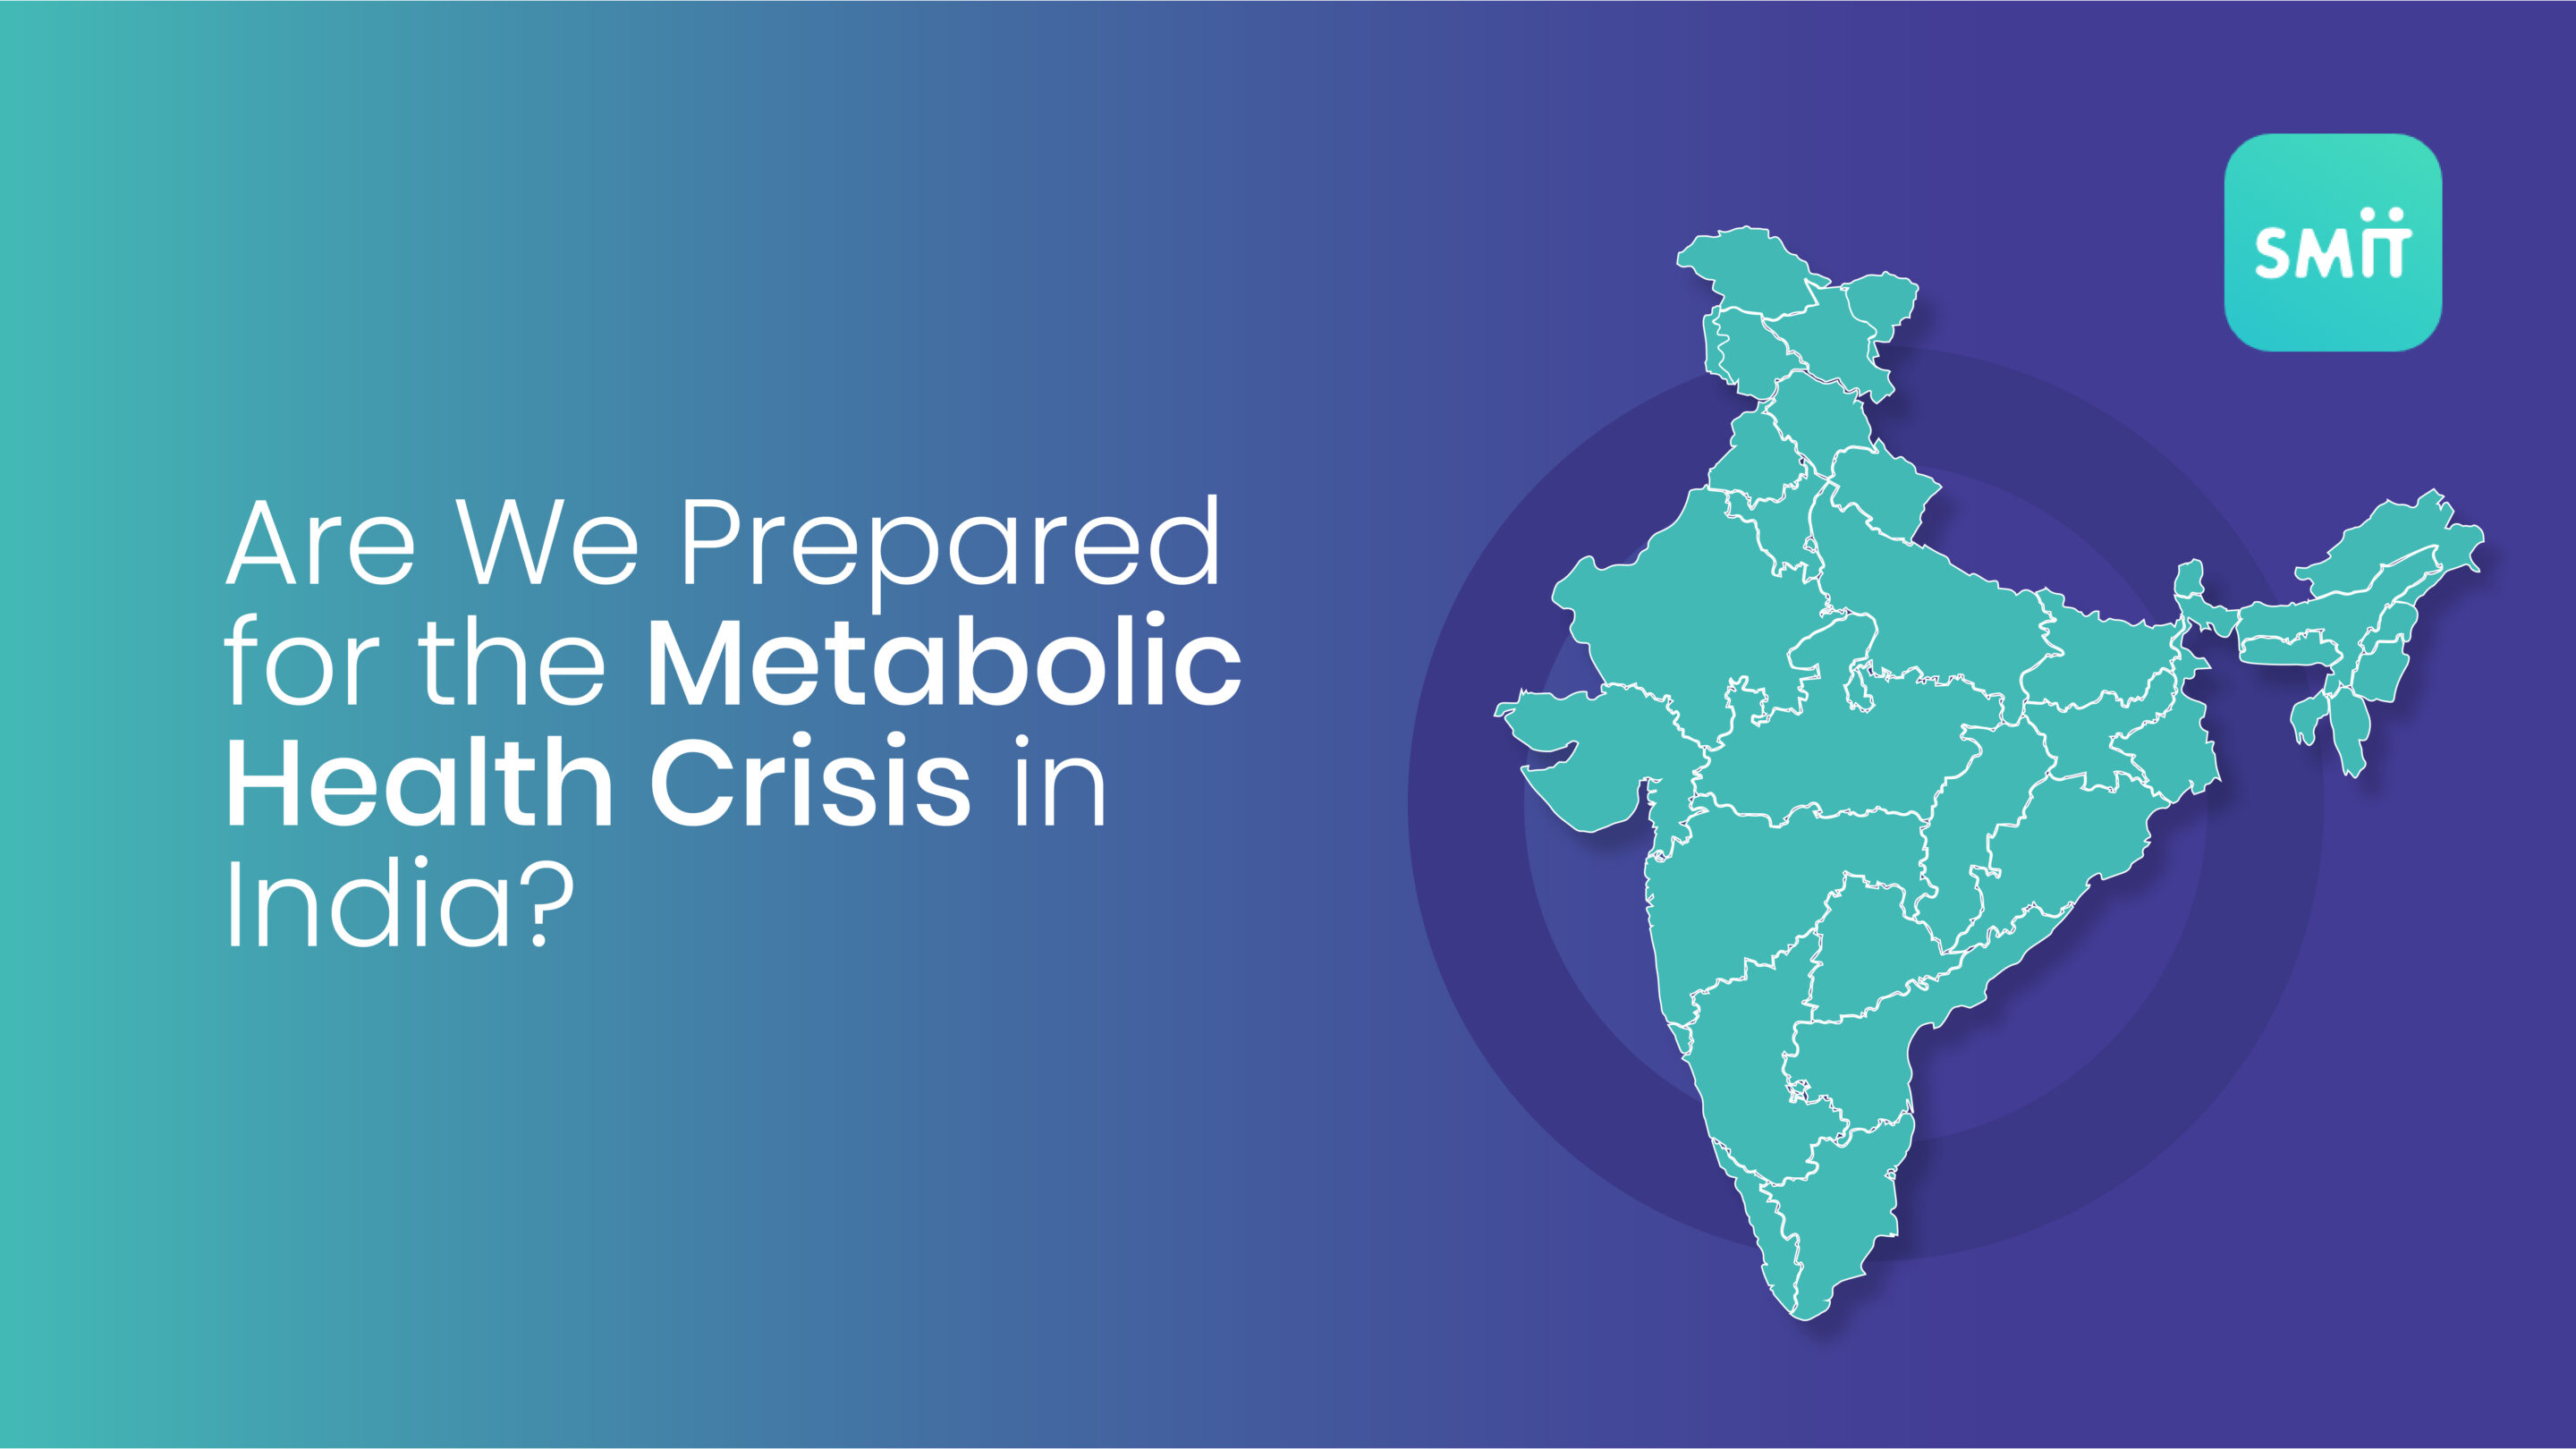 Are We Prepared for the Metabolic Health Crisis in India?